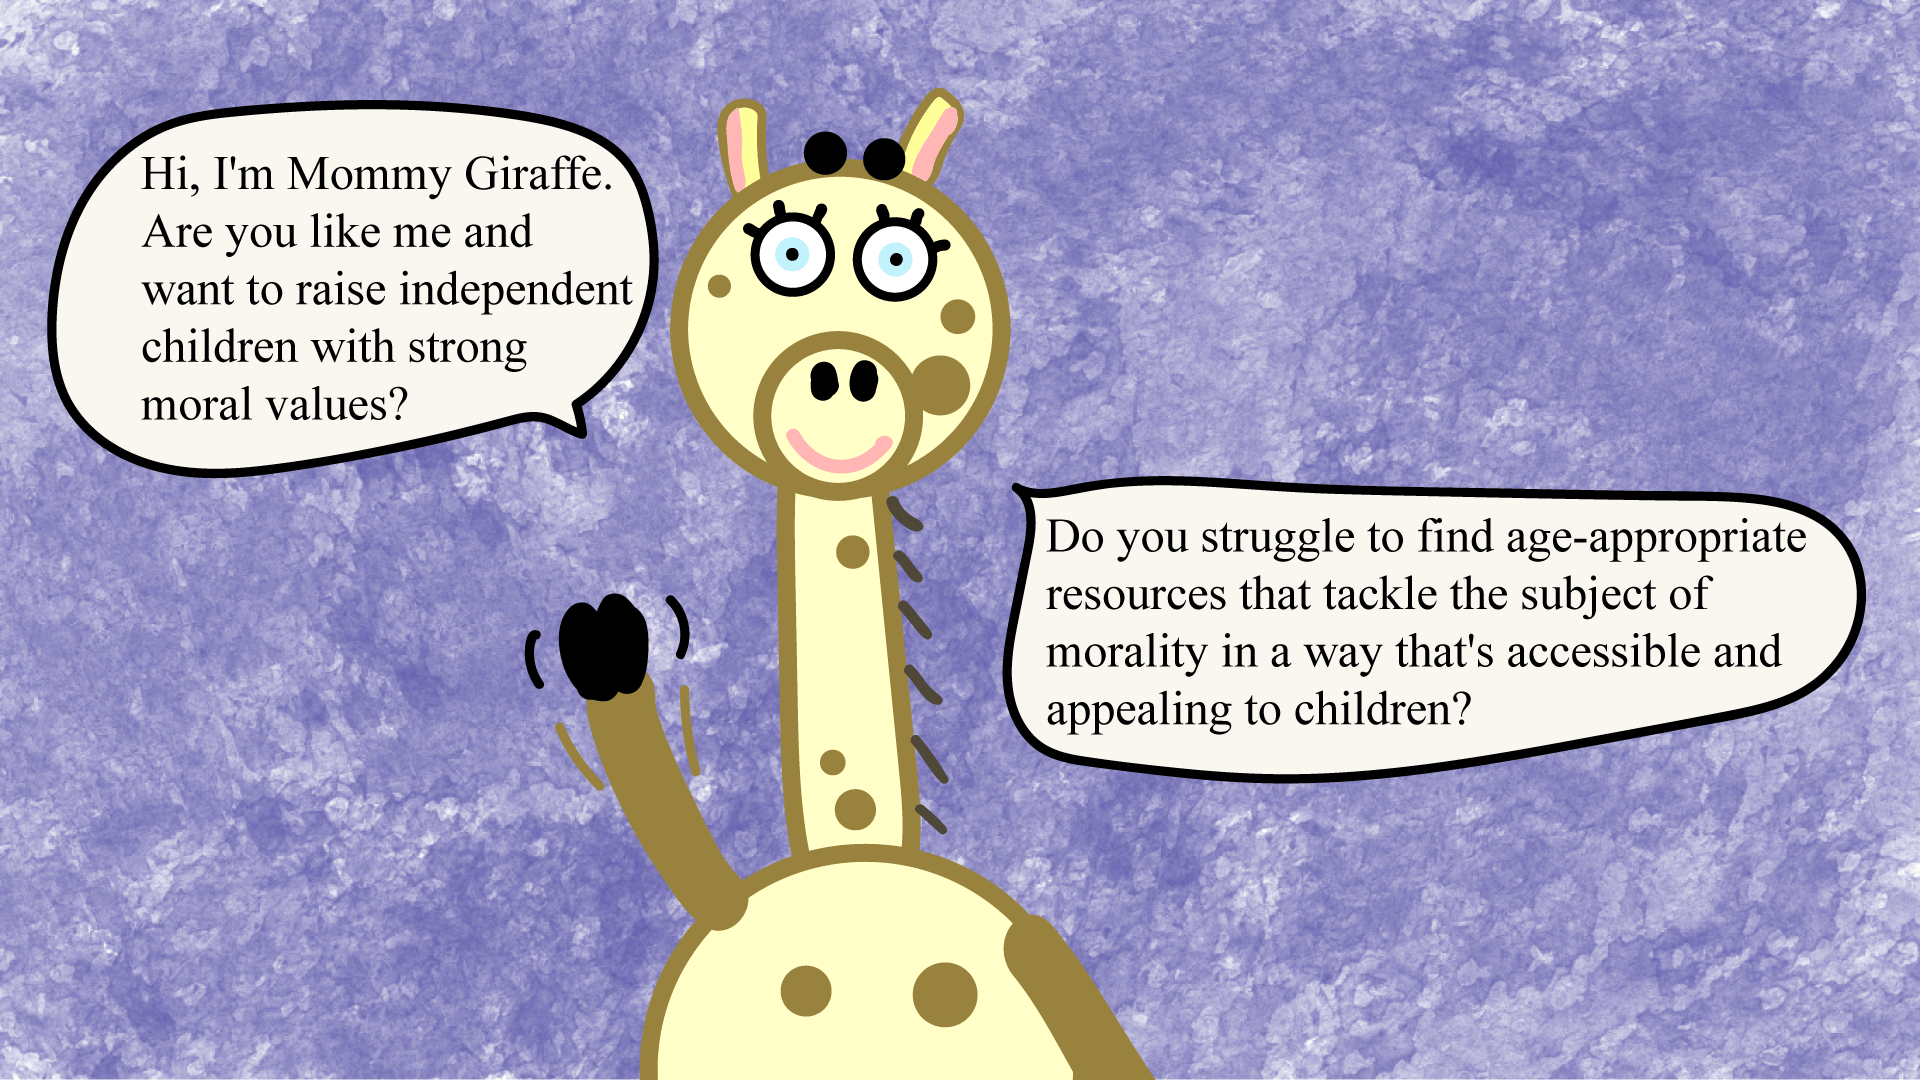 Hi, I'm Mommy Giraffe. Are you like me and want to raise independent children with strong moral values?  Do you struggle to find age-appropriate resources that tackle the subject of morality in a way that's accessible and appealing to children?